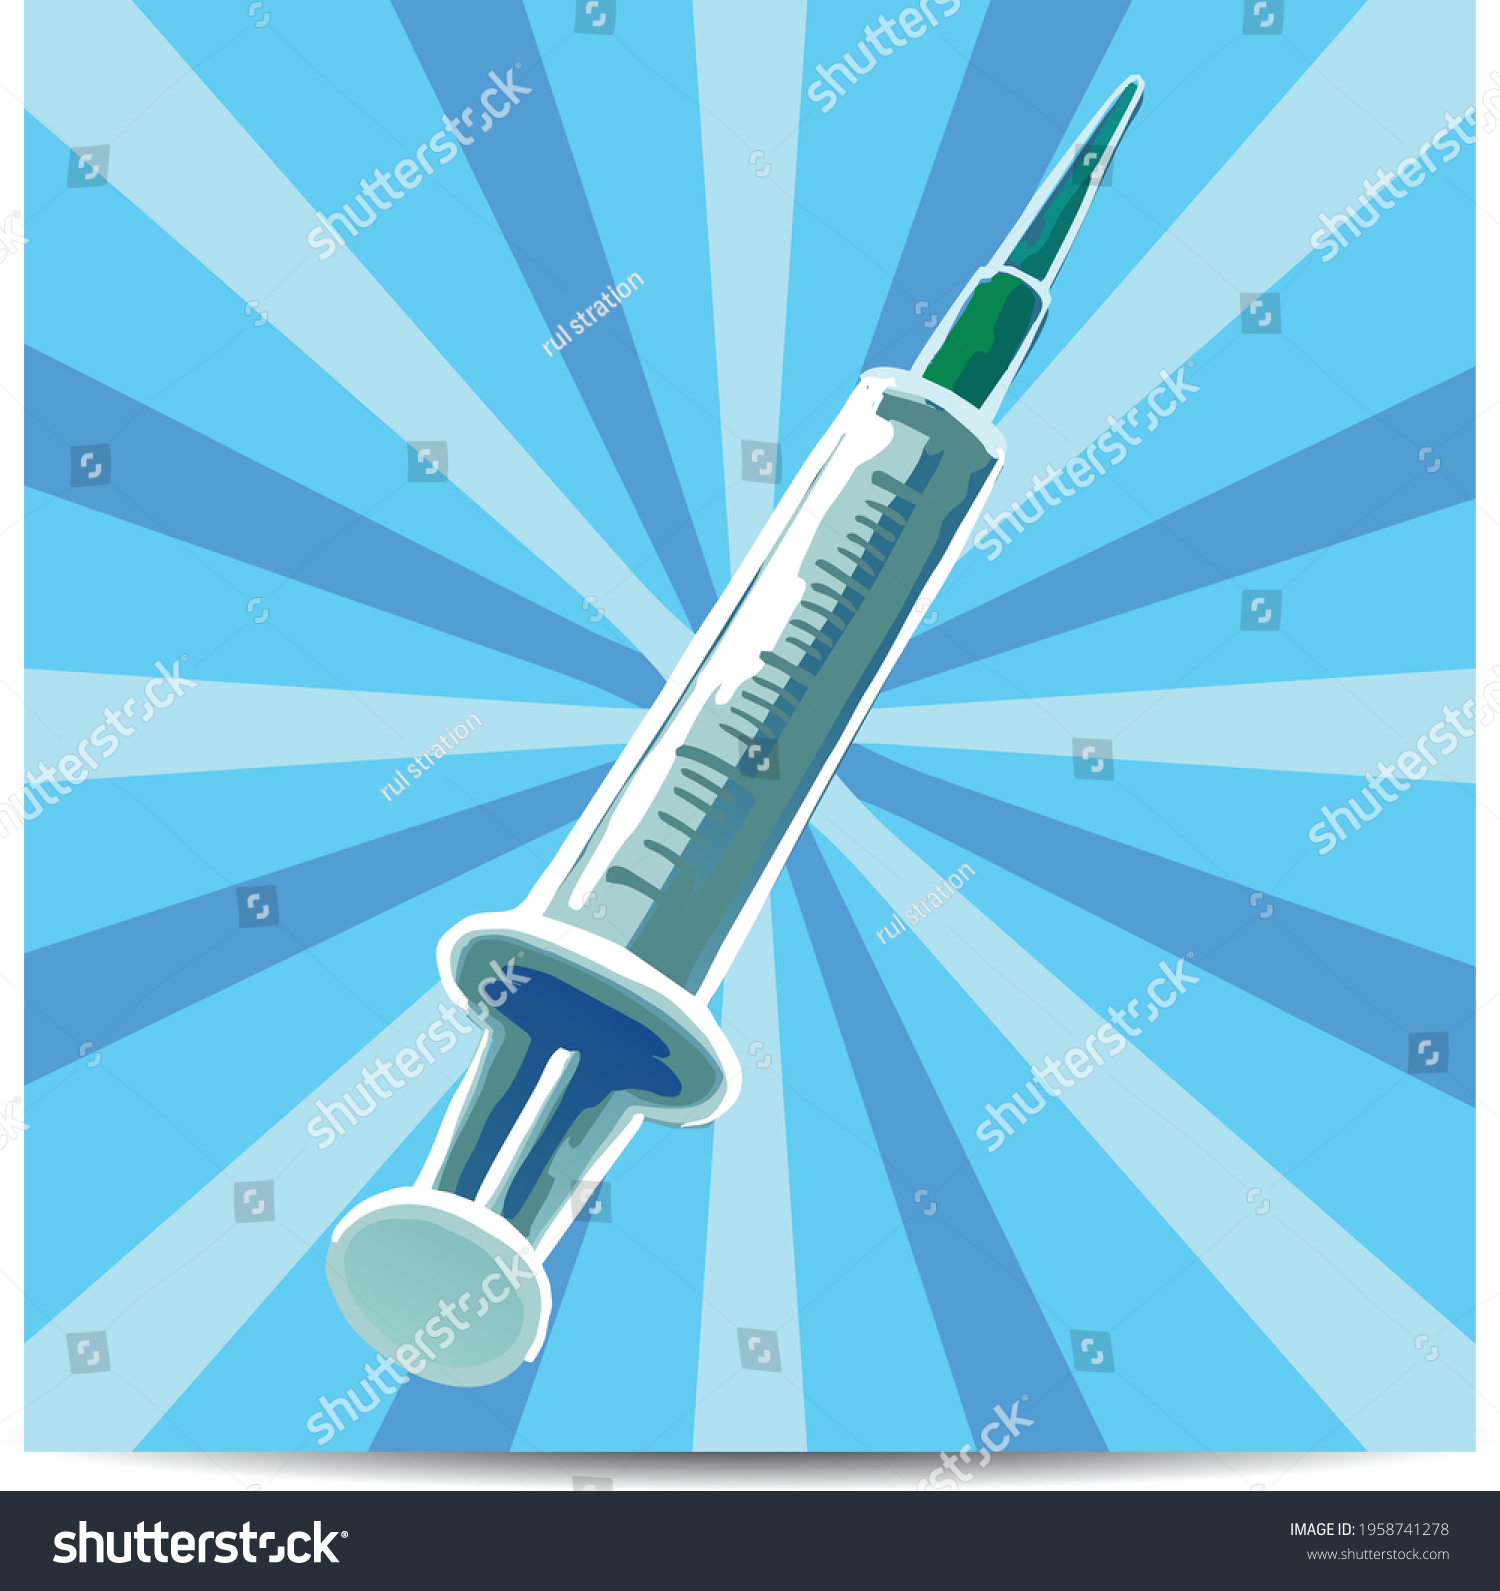 Medical Injections Cartoonstyle Suitable Health Infographics Stock Vector Royalty Free